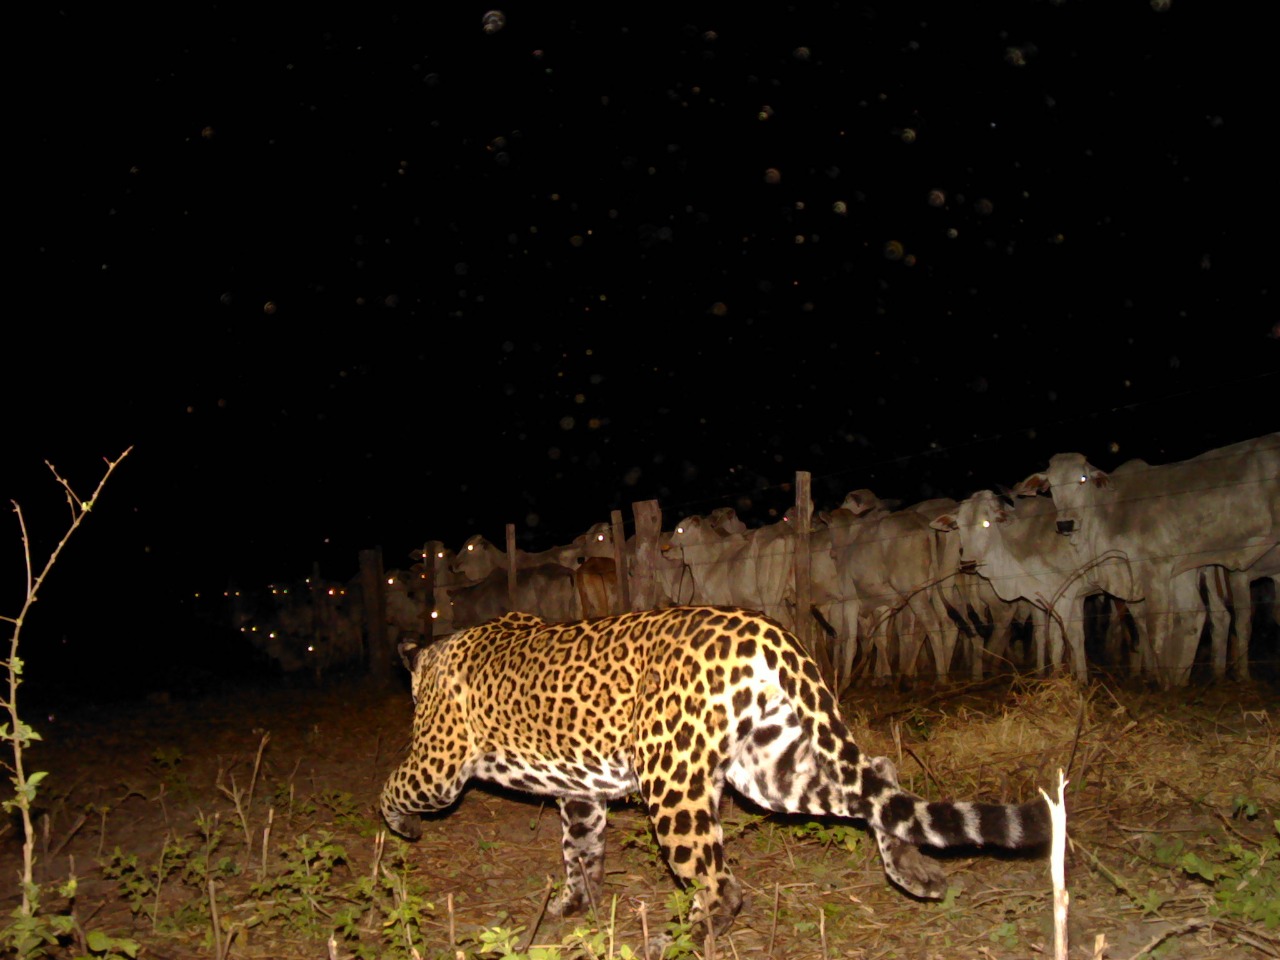 "Sao Bento night enclosure with an electric fence preventing jaguar attacks on a vulnerable group of just-weaned calves."